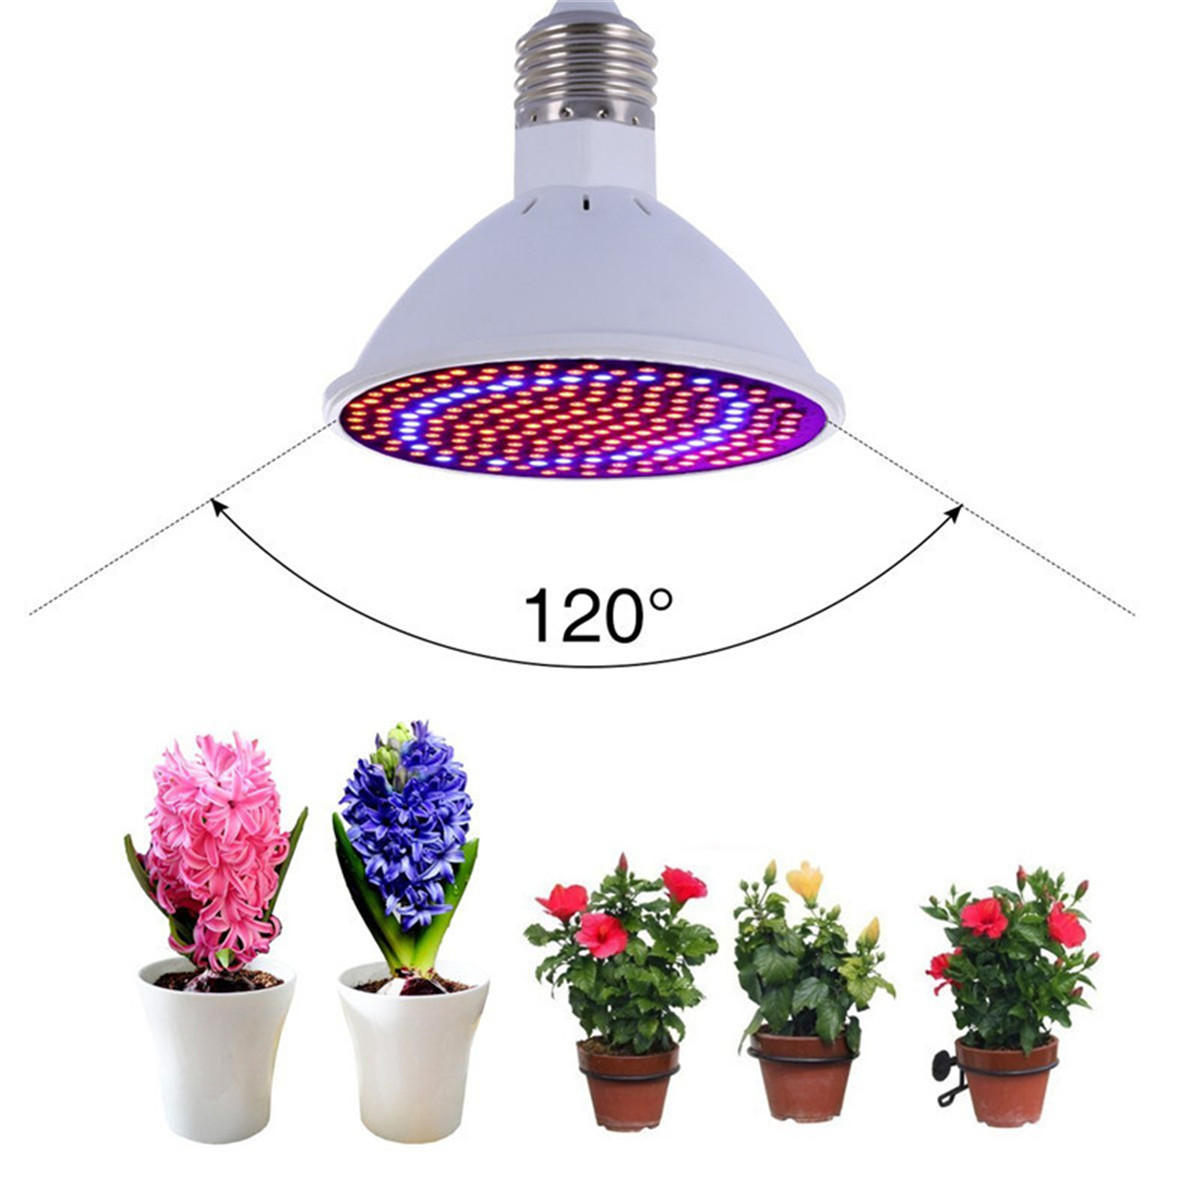 Details about   15W 20W 26W E27 LED Bulb Grow Light for Indoor Flower Plant Growth Seedling US 